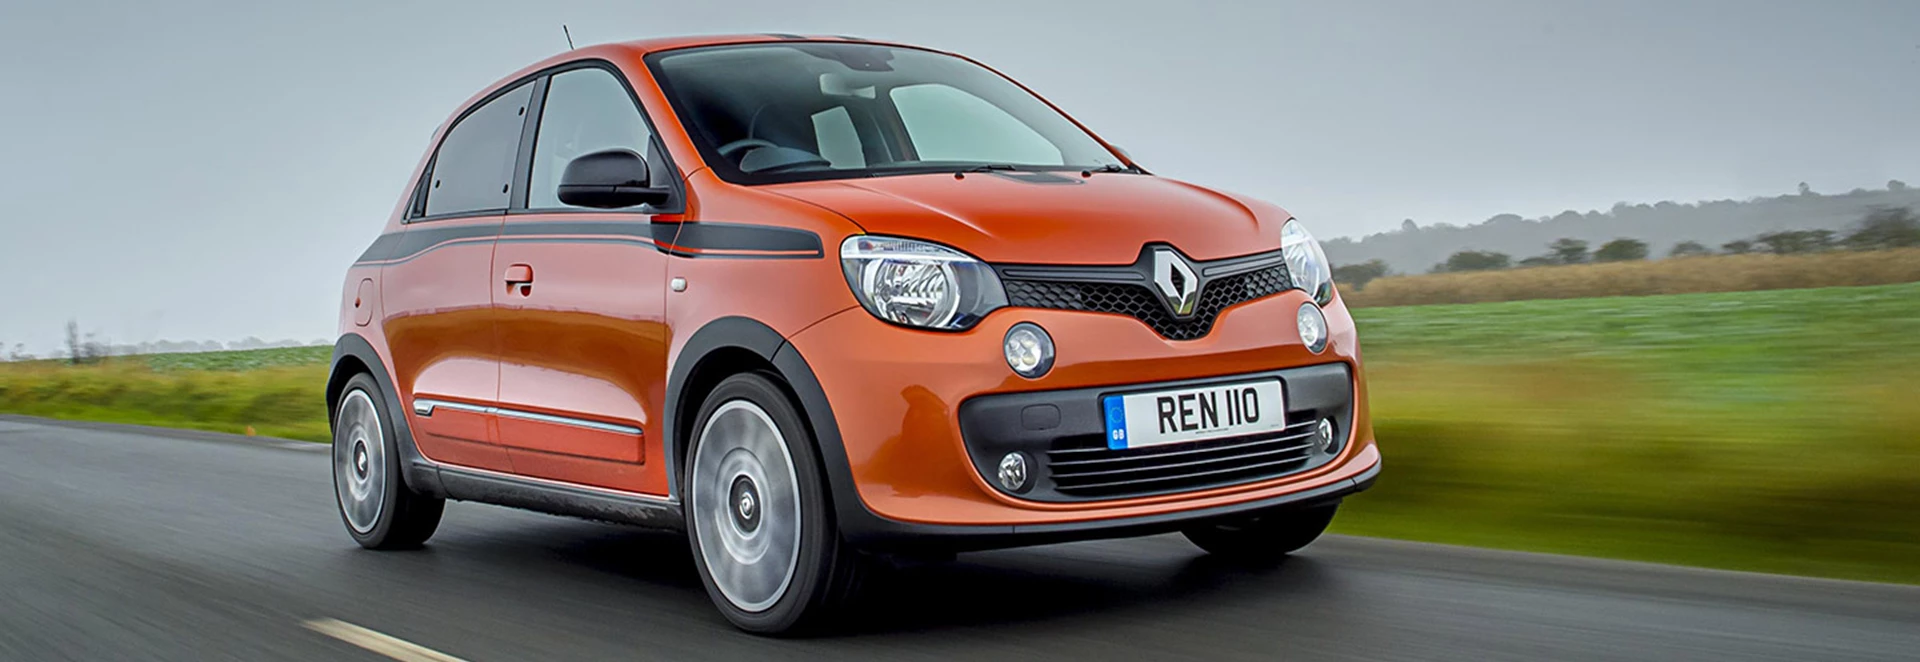 Renault Twingo GT warm hatch offers more power